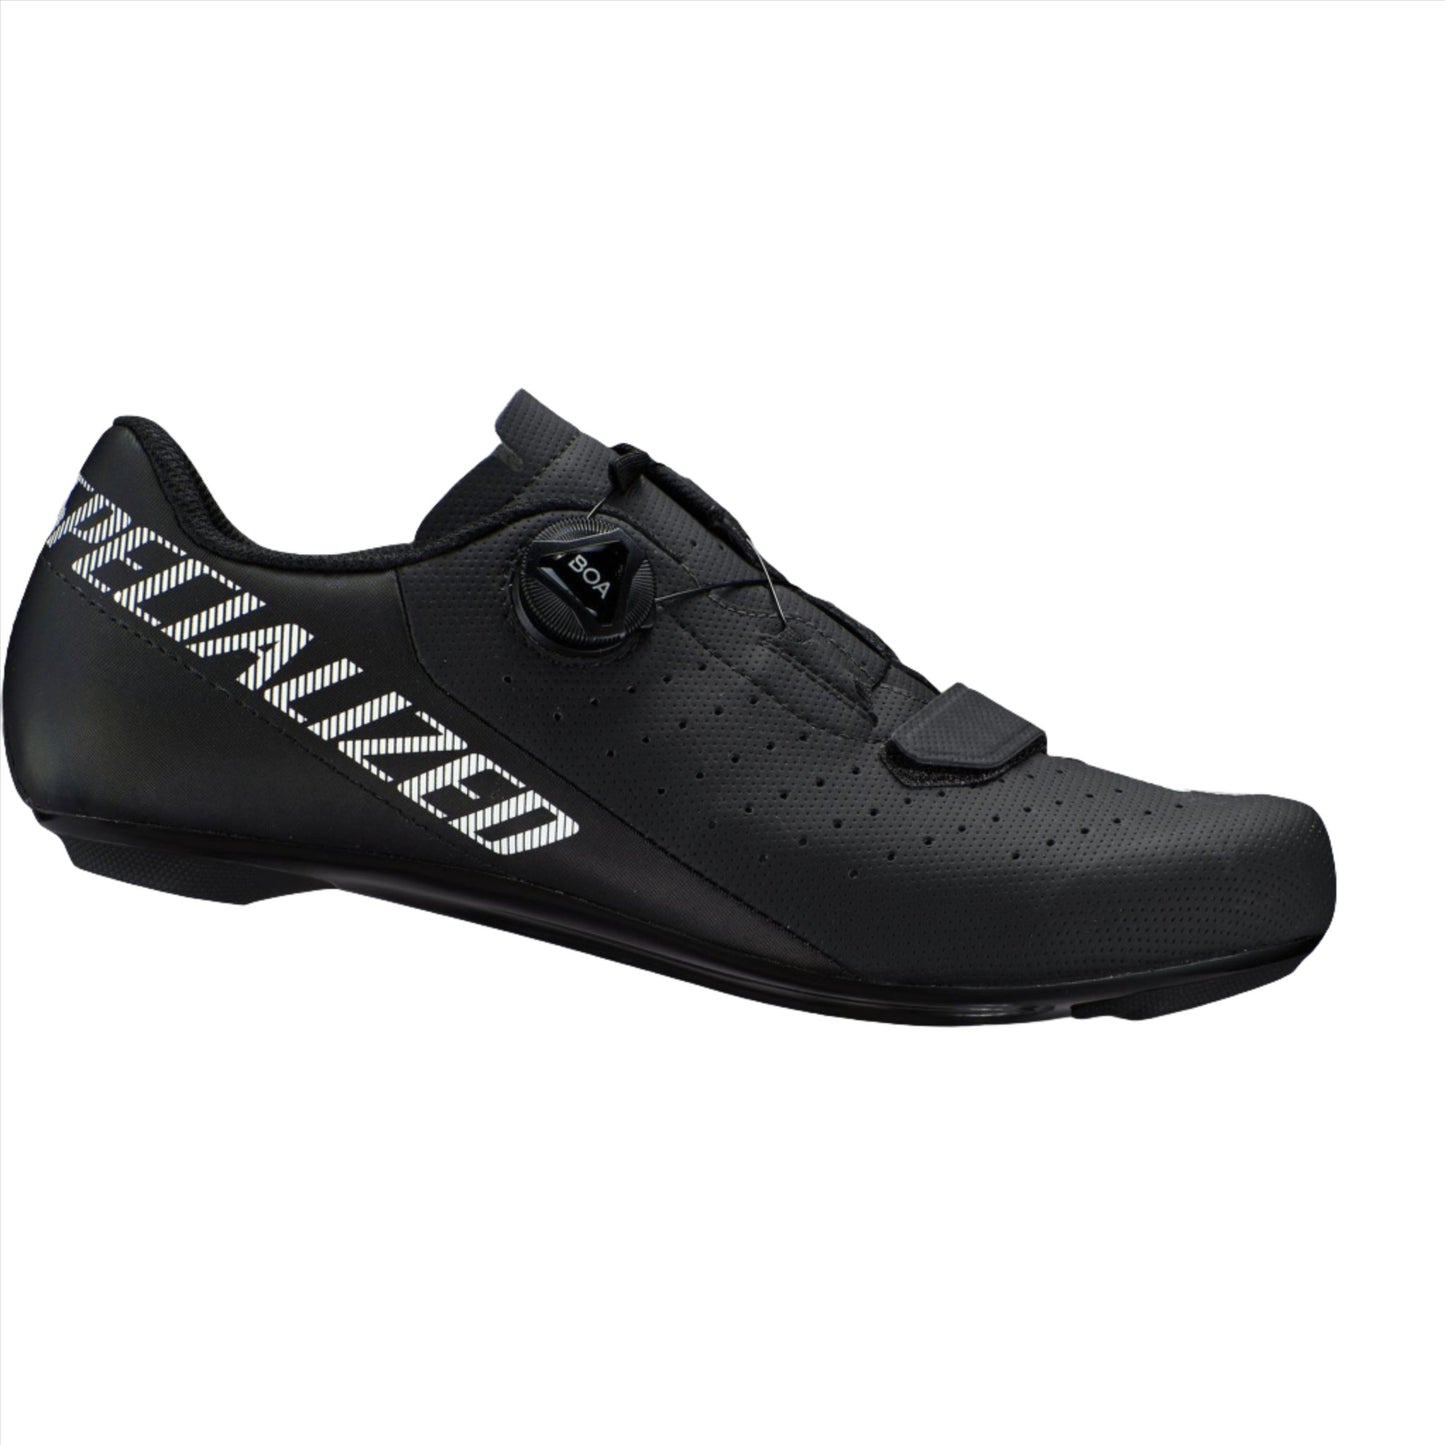 Torch 1.0 Road Shoes | Complete Cyclist - Take the performance and Body Geometry ergonomics of our high-end road shoes, put them in an affordable design, and you basically have the Torch 1.0 Road shoes.